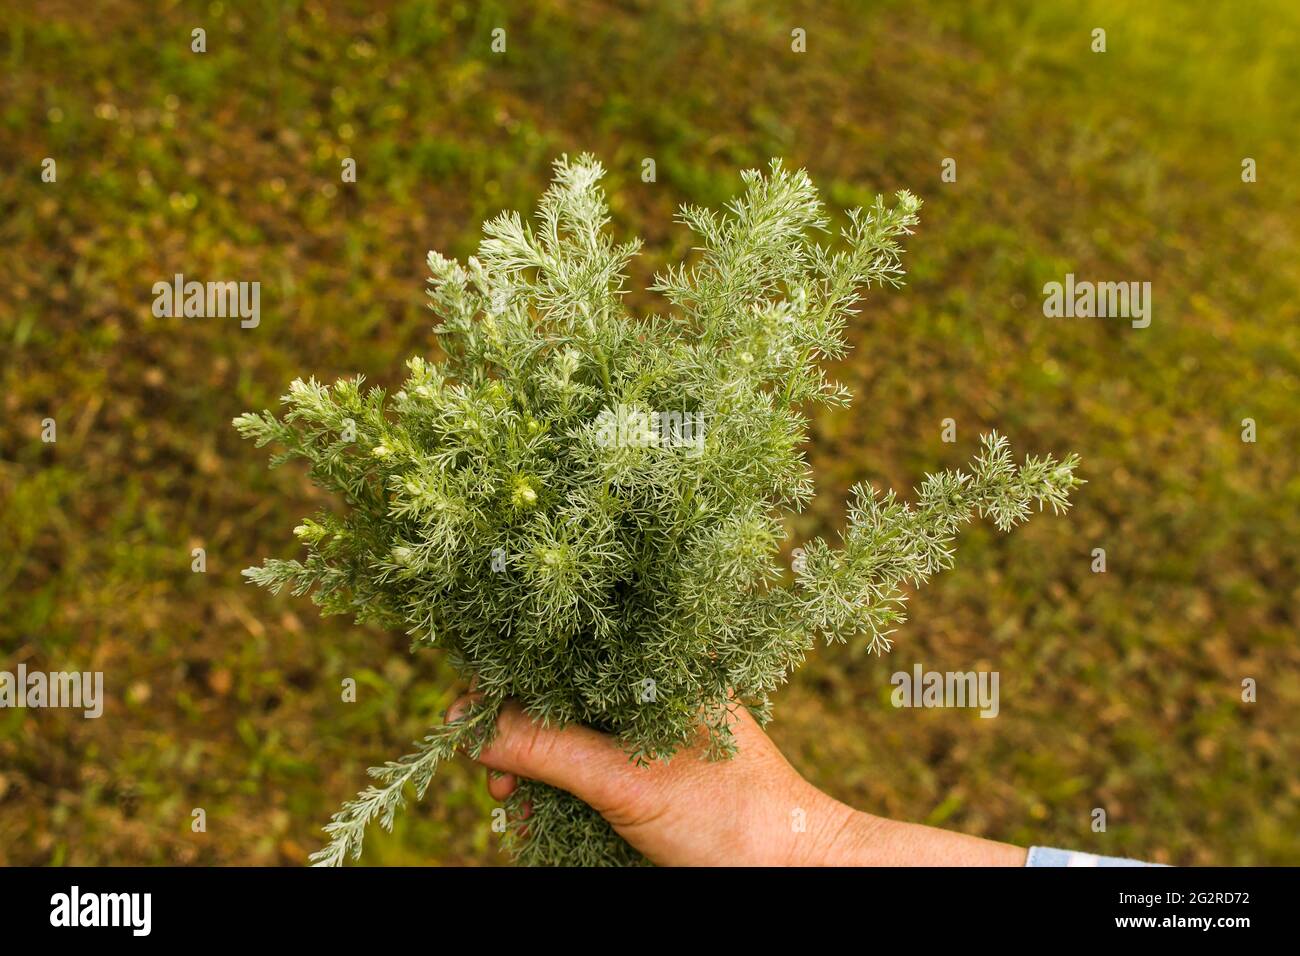 Female hands hold on to branches with leaves of Tauric wormwood. Artemisia taurica Willd, absinthe wormwood is a natural hygiene product. Stock Photo